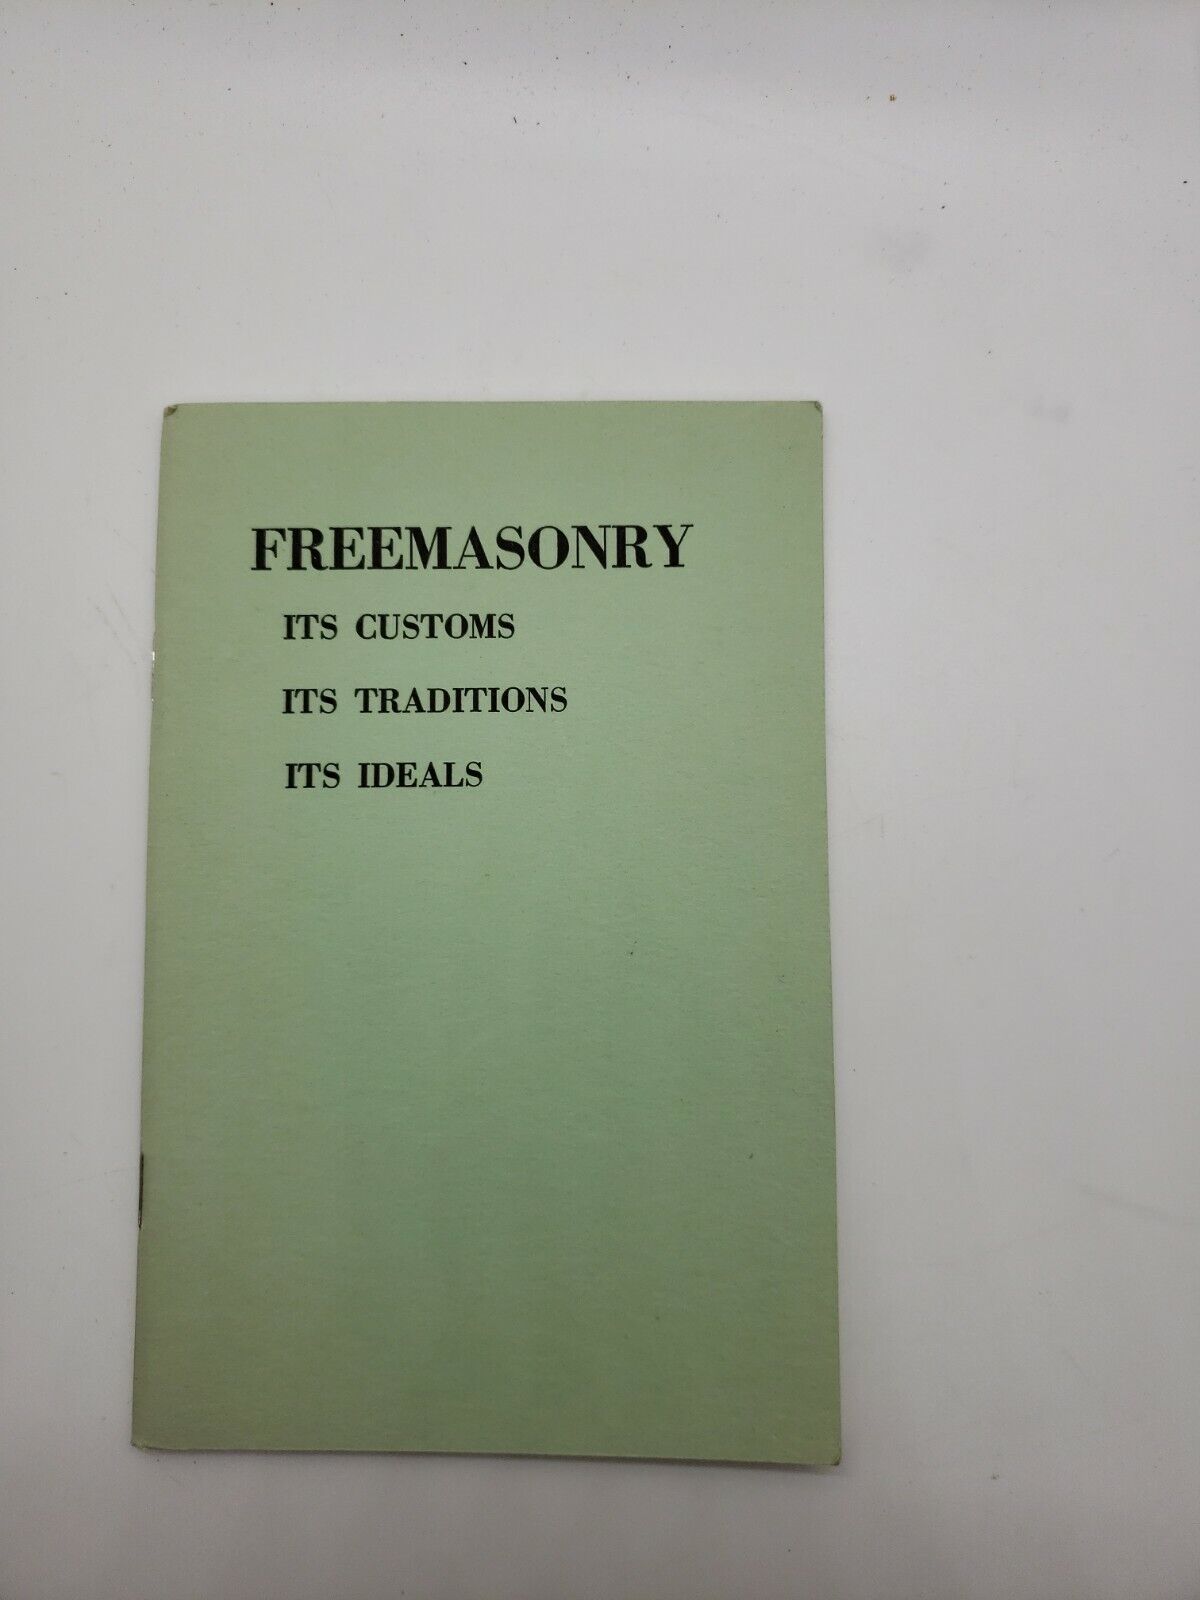 Vintage 1960 booklet FREEMASONRY Its Customs, Traditions, Ideals by Ray Denslow